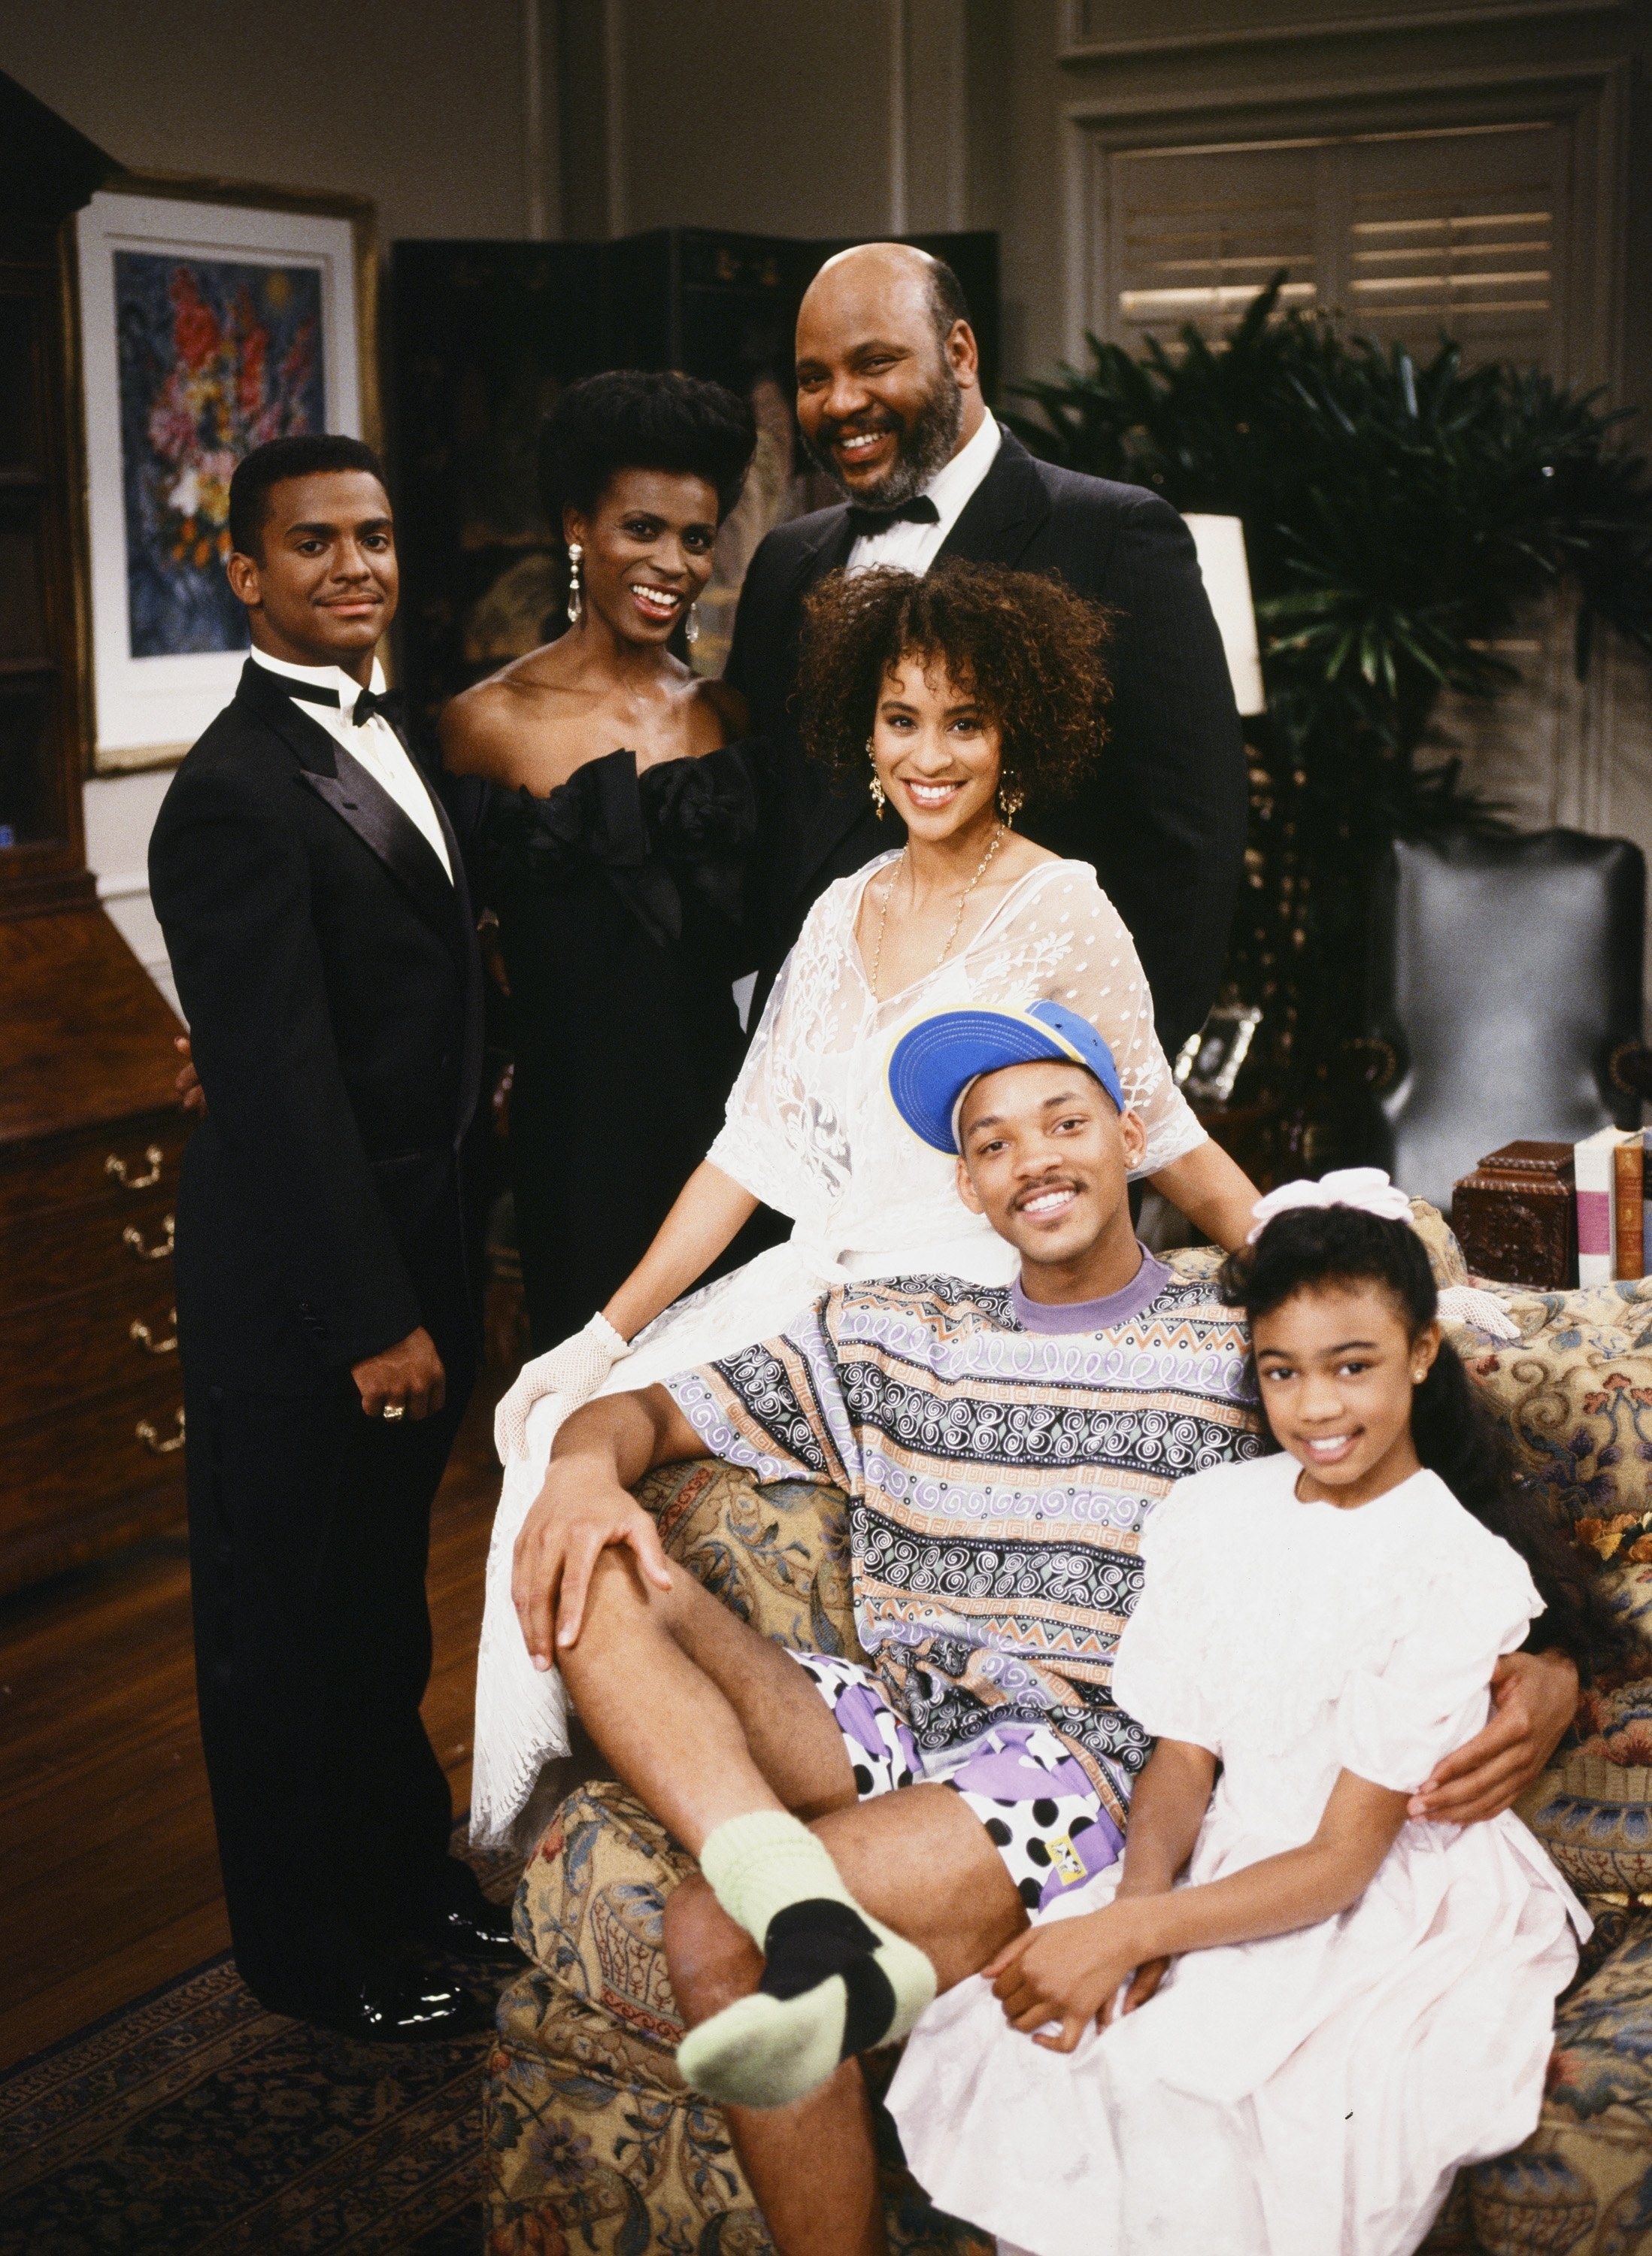 Members of the original cast of The Fresh Prince of Bel-Air pose together on set.